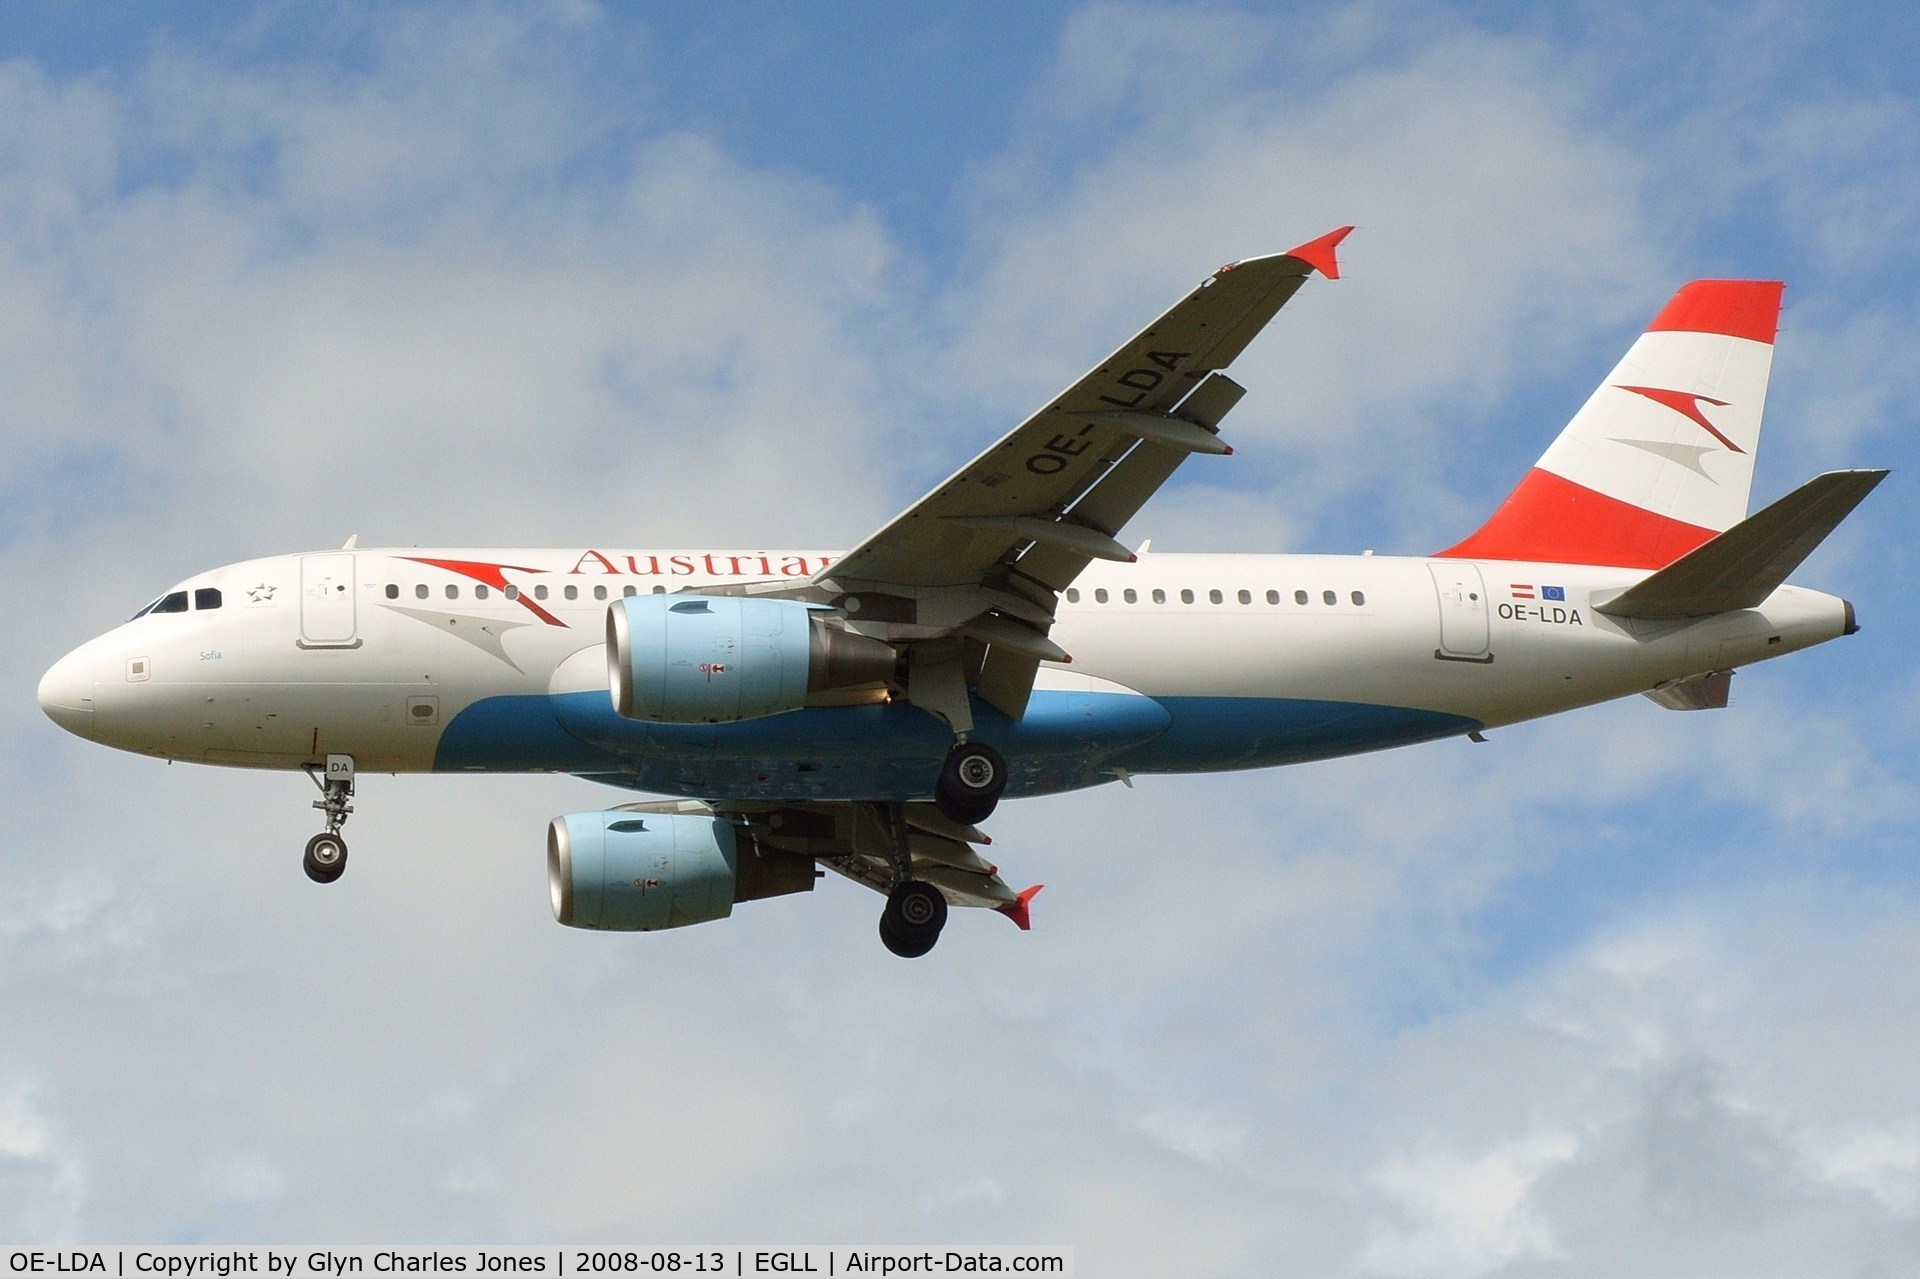 OE-LDA, 2004 Airbus A319-112 C/N 2131, 'Sofia' on finals to runway 27L. Test registration was D-AVWS. Operated by Austrian Airlines.